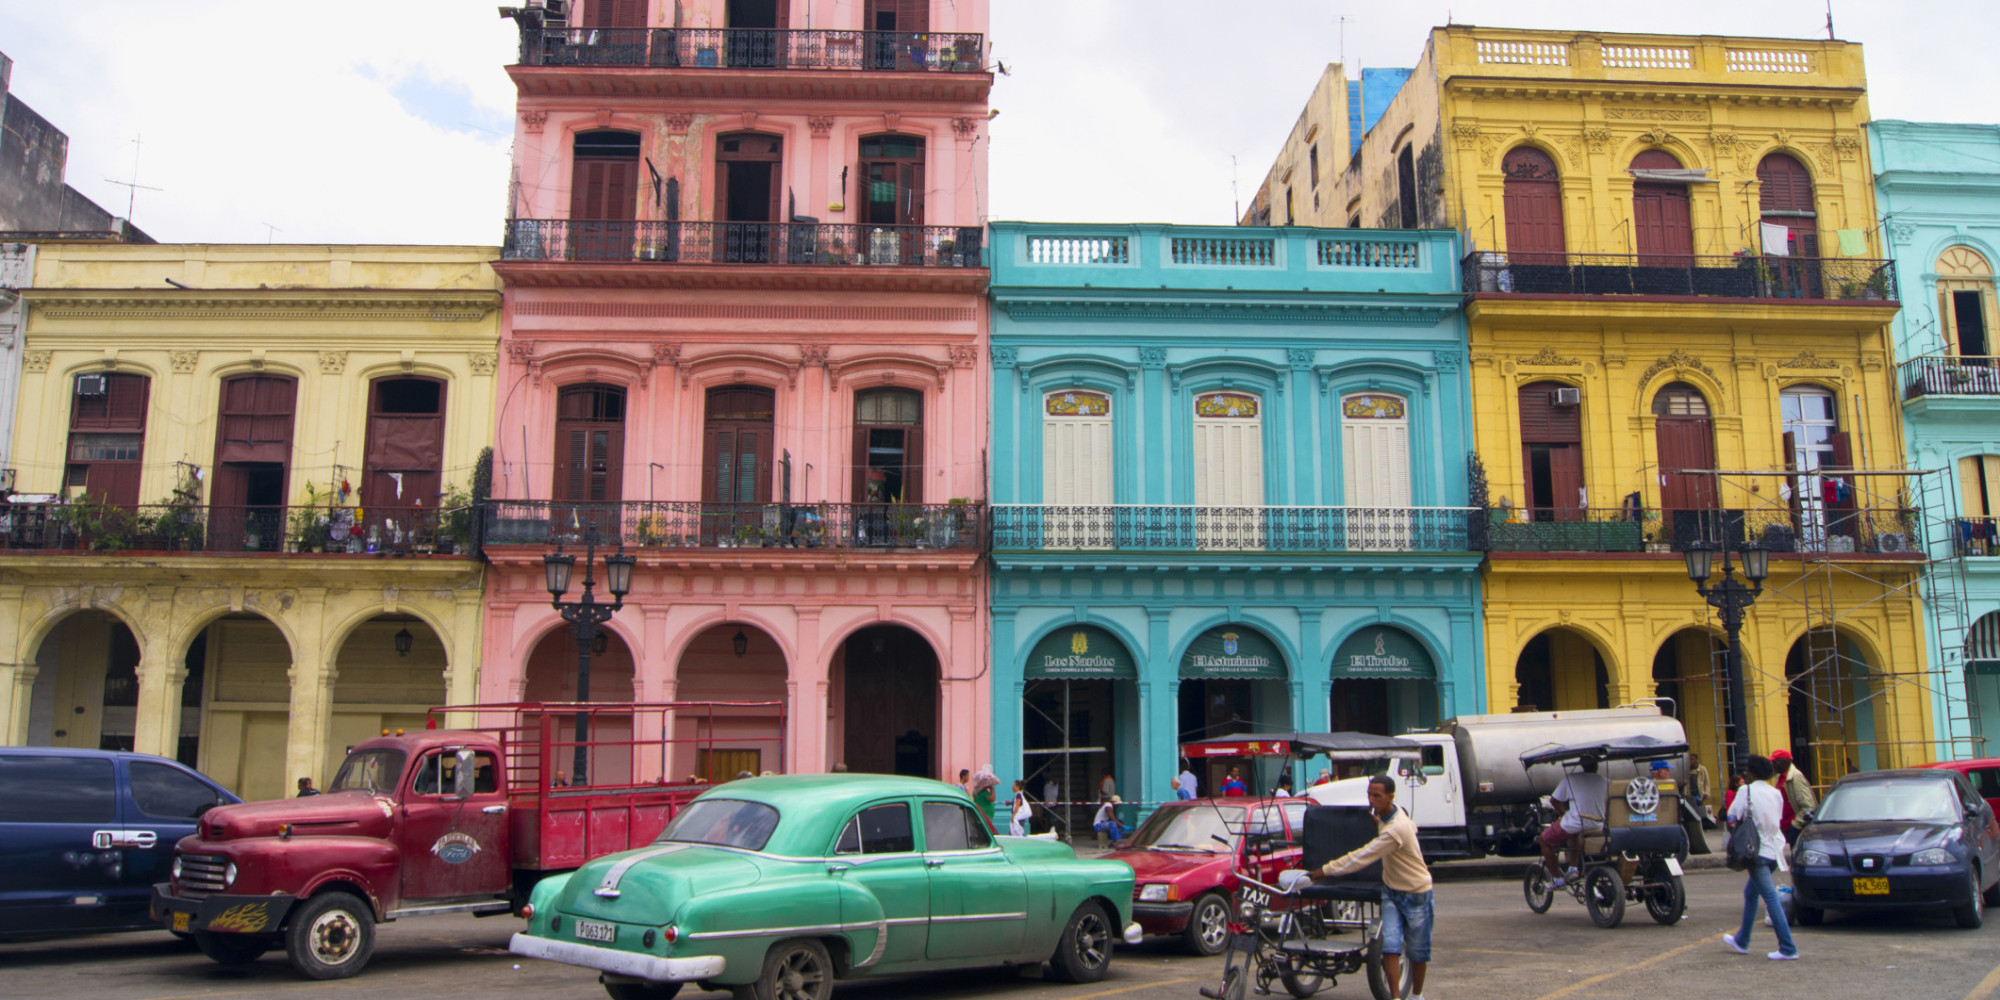 U.S.-Cuba Deal Means End Of Golden Era For Canadian Tourists: Experts